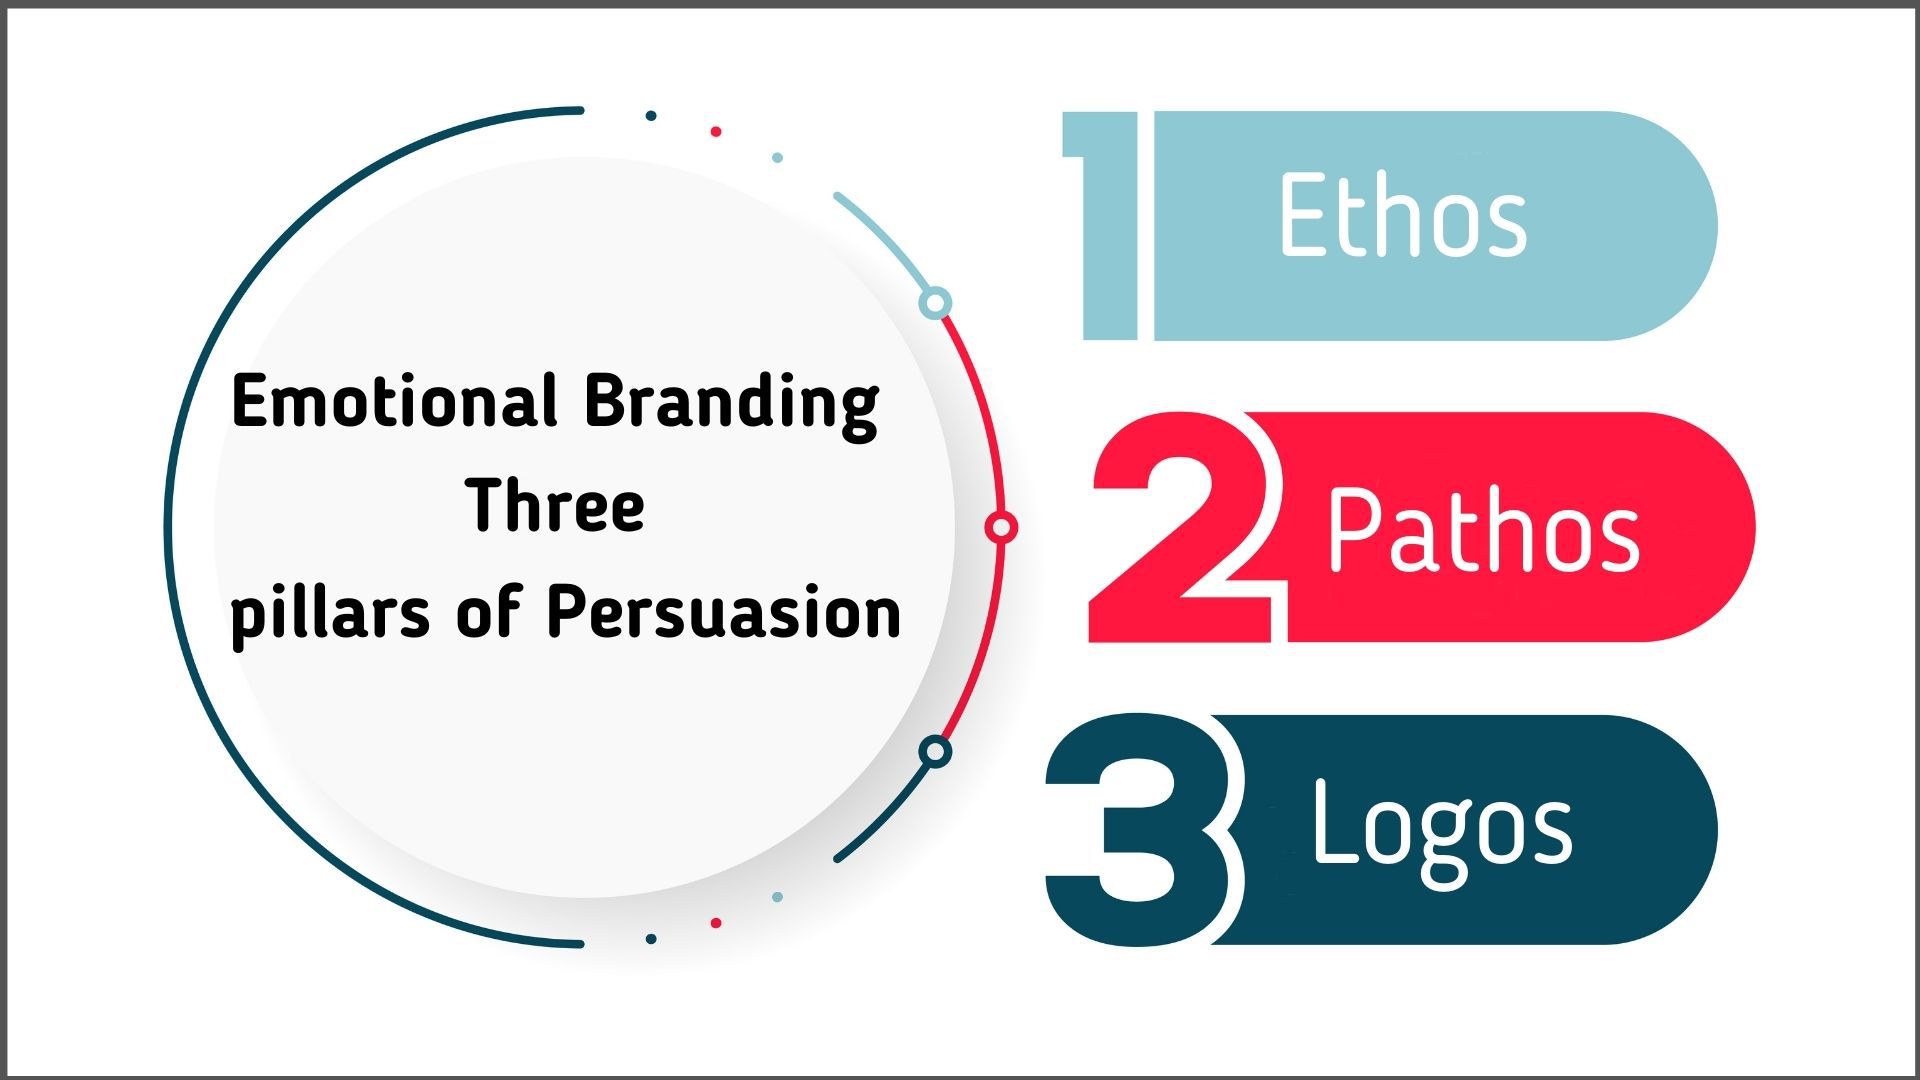 Emotional Branding - Definition, Meaning, Stages and Examples